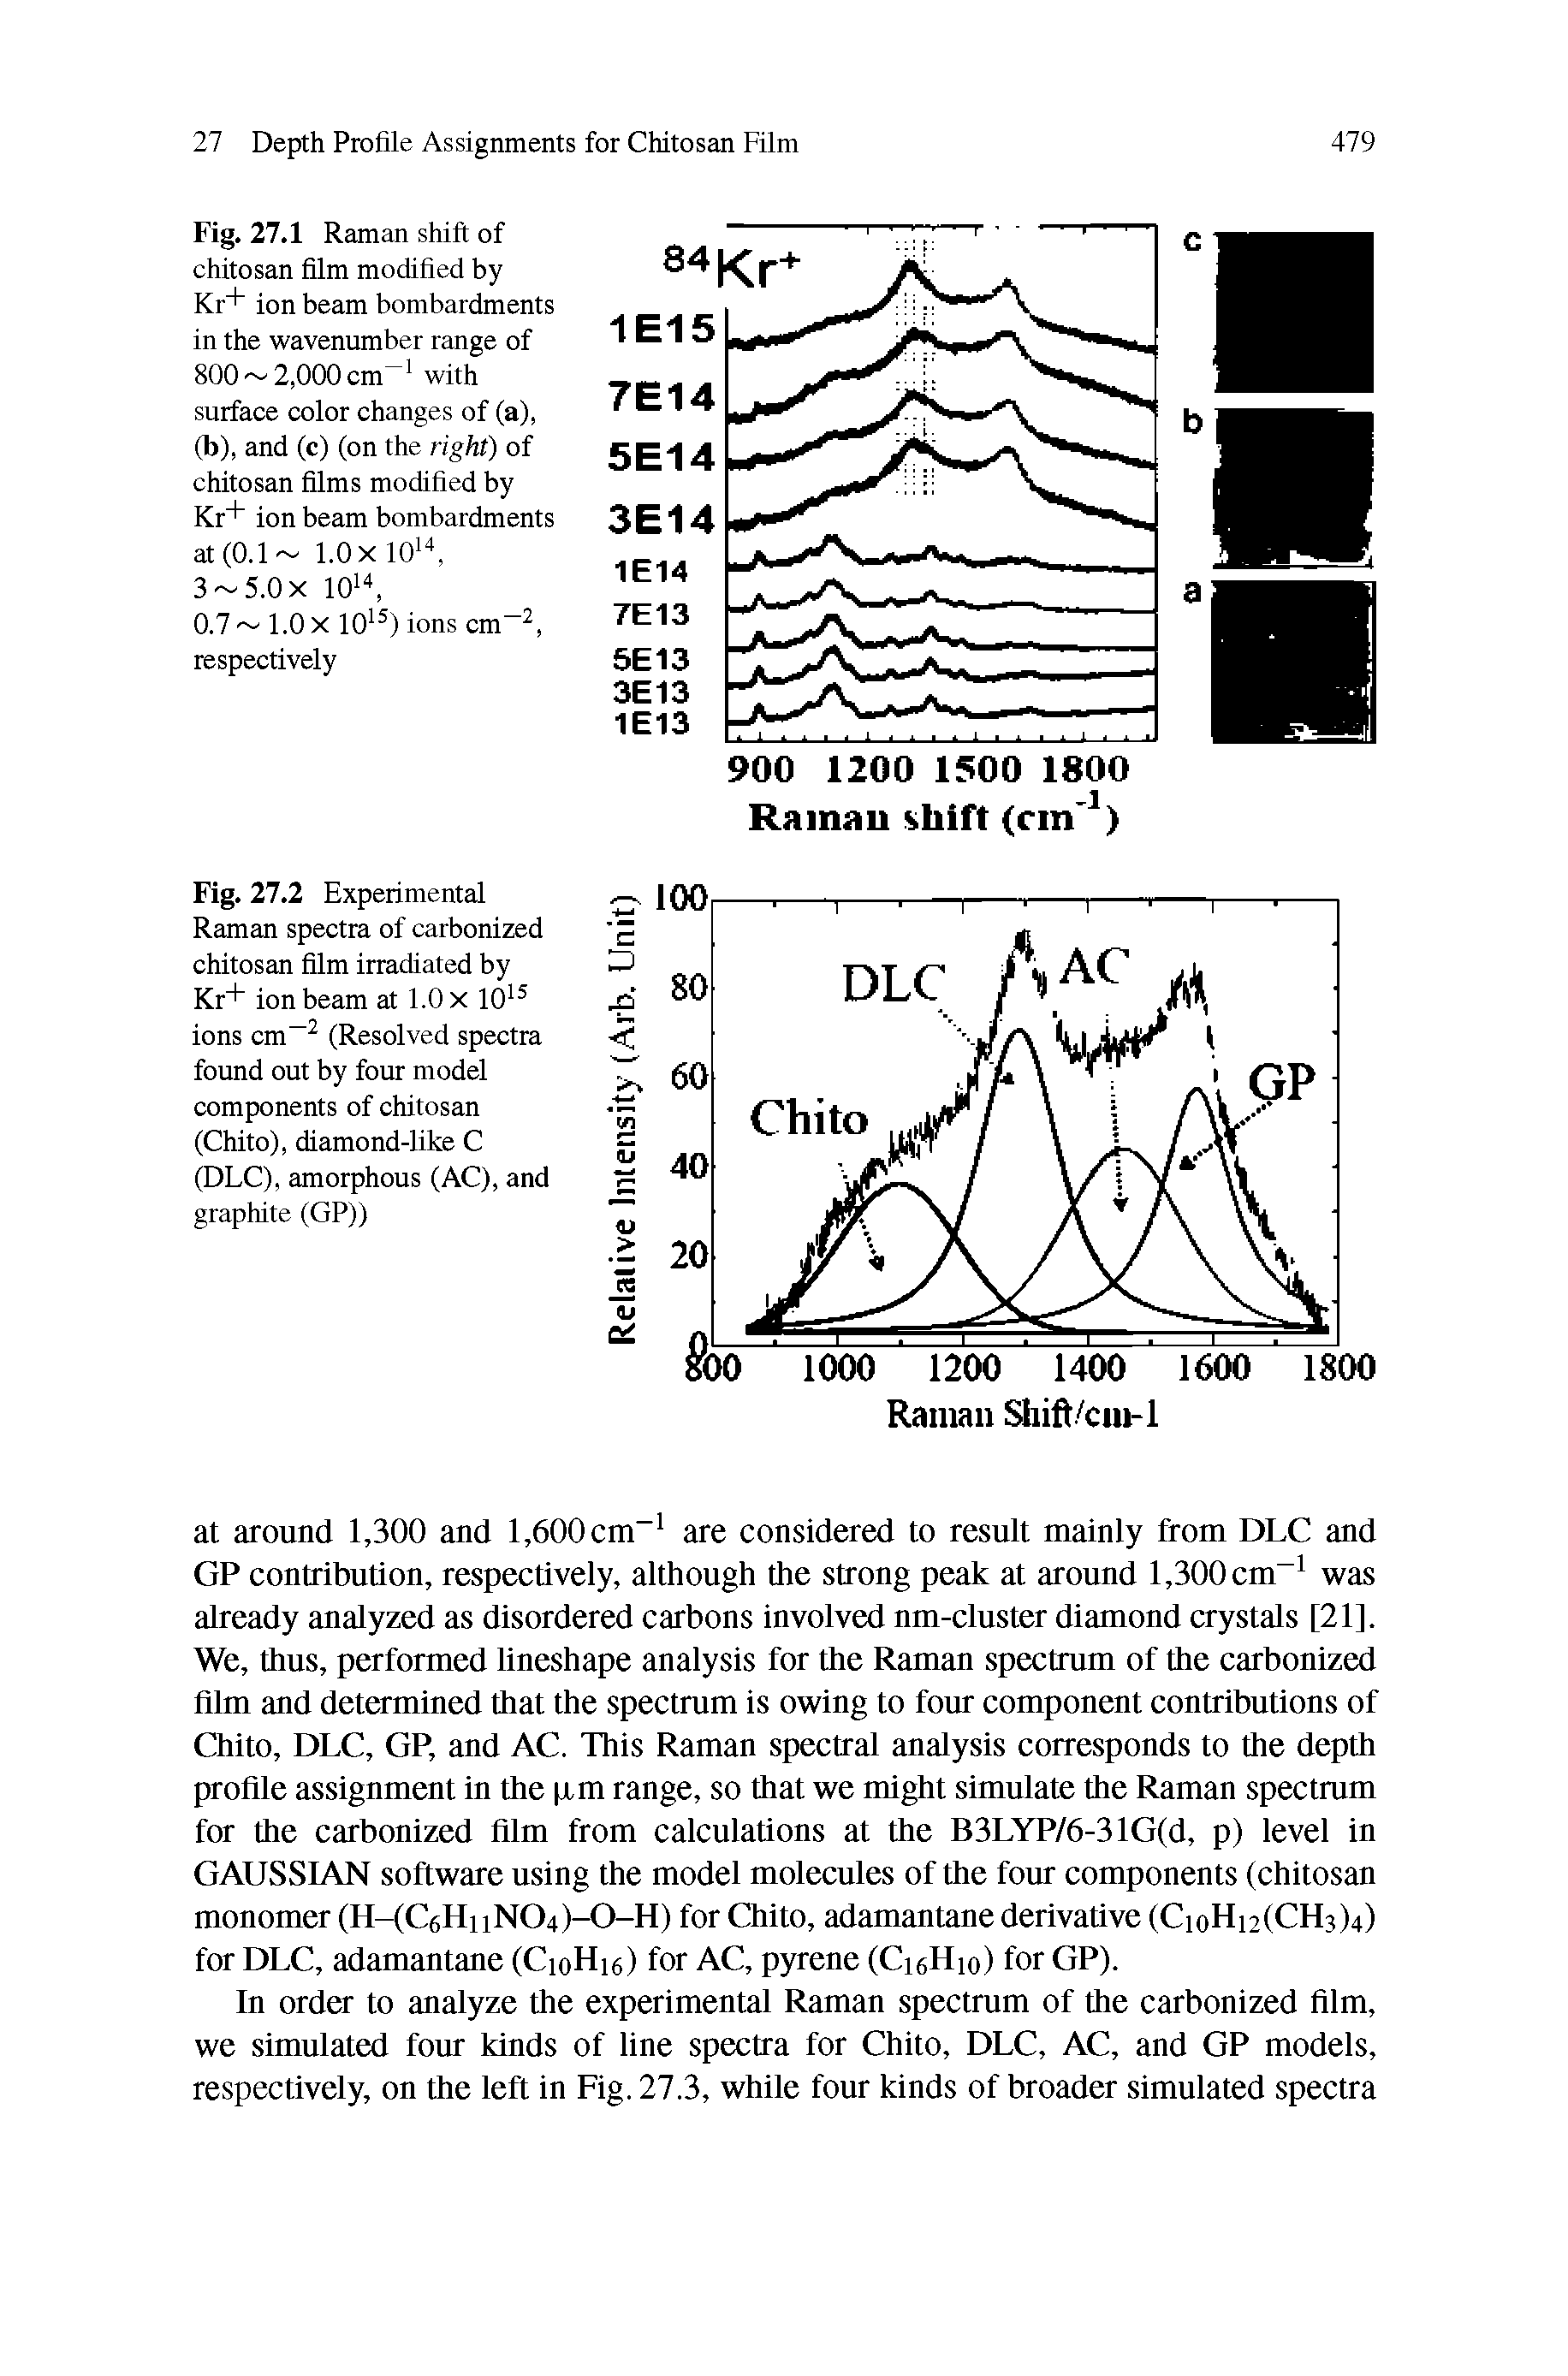 Fig. 27.1 Raman shift of chitosan film modified by Kr+ ion beam bombardments in the wavenumber range of 800 2,000 cm with surface color changes of (a), (b), and (c) (on the right) of chitosan films modified by Kr+ ion beam bombardments at (0.1 1.0xl0 3 5.0x 10 ...